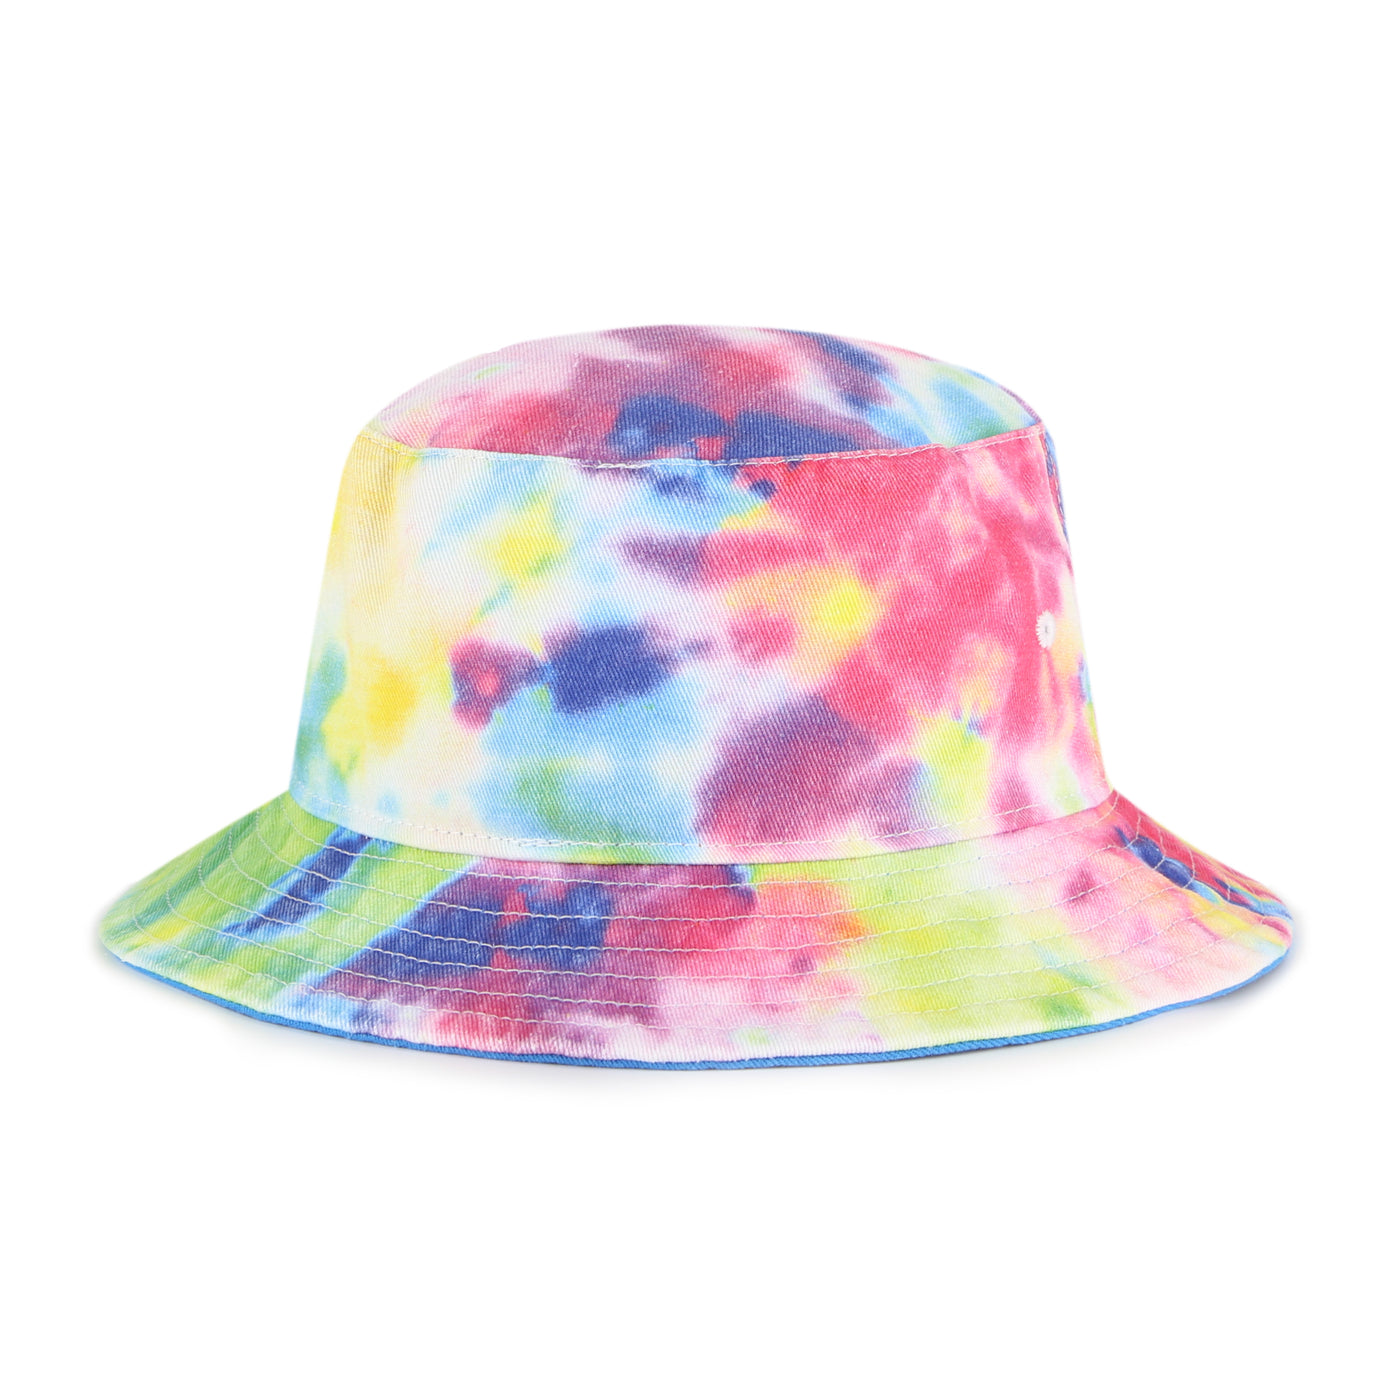 CHICAGO CUBS '47 YOUTH C LOGO TIE DYE BUCKET HAT